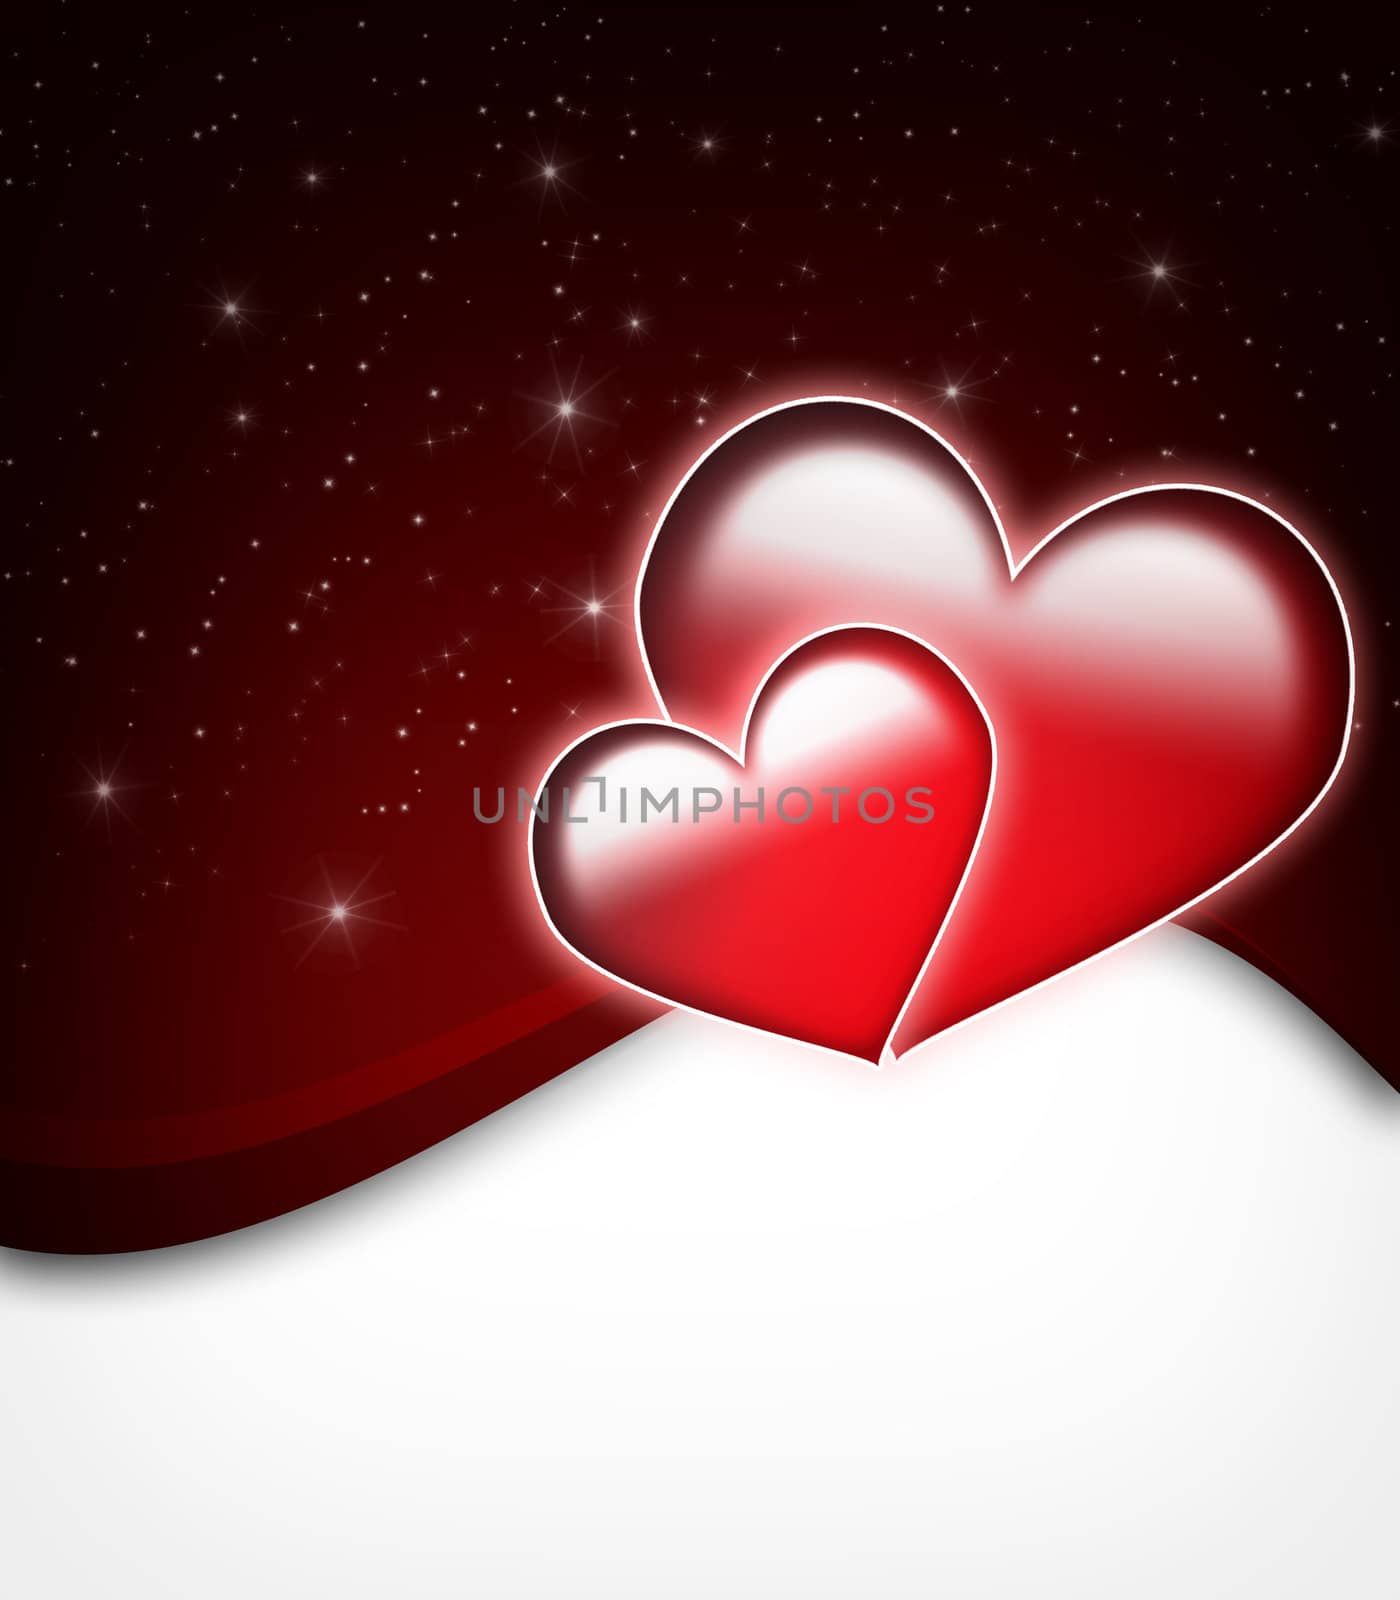 Valentines Day Card with  two big hearts and stars - all in red